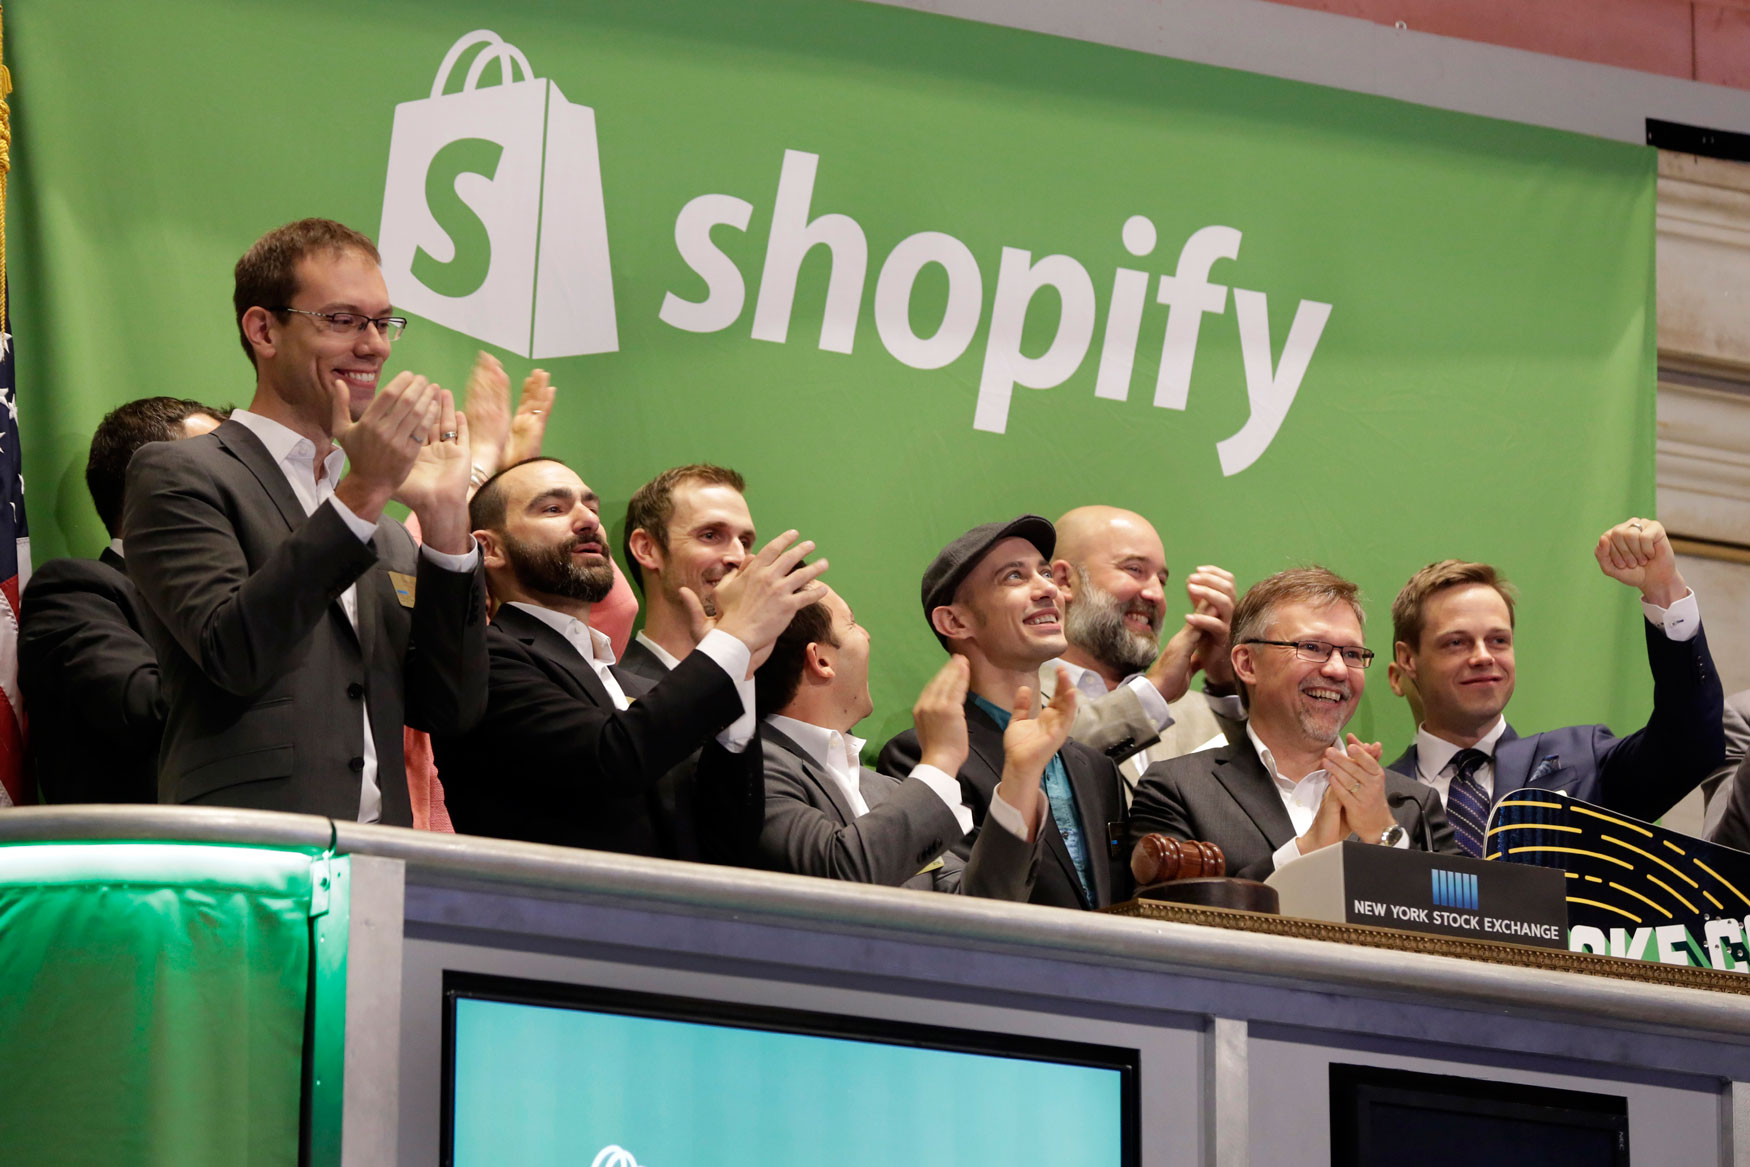 Shopify is one of Canada's biggest tech success stories.